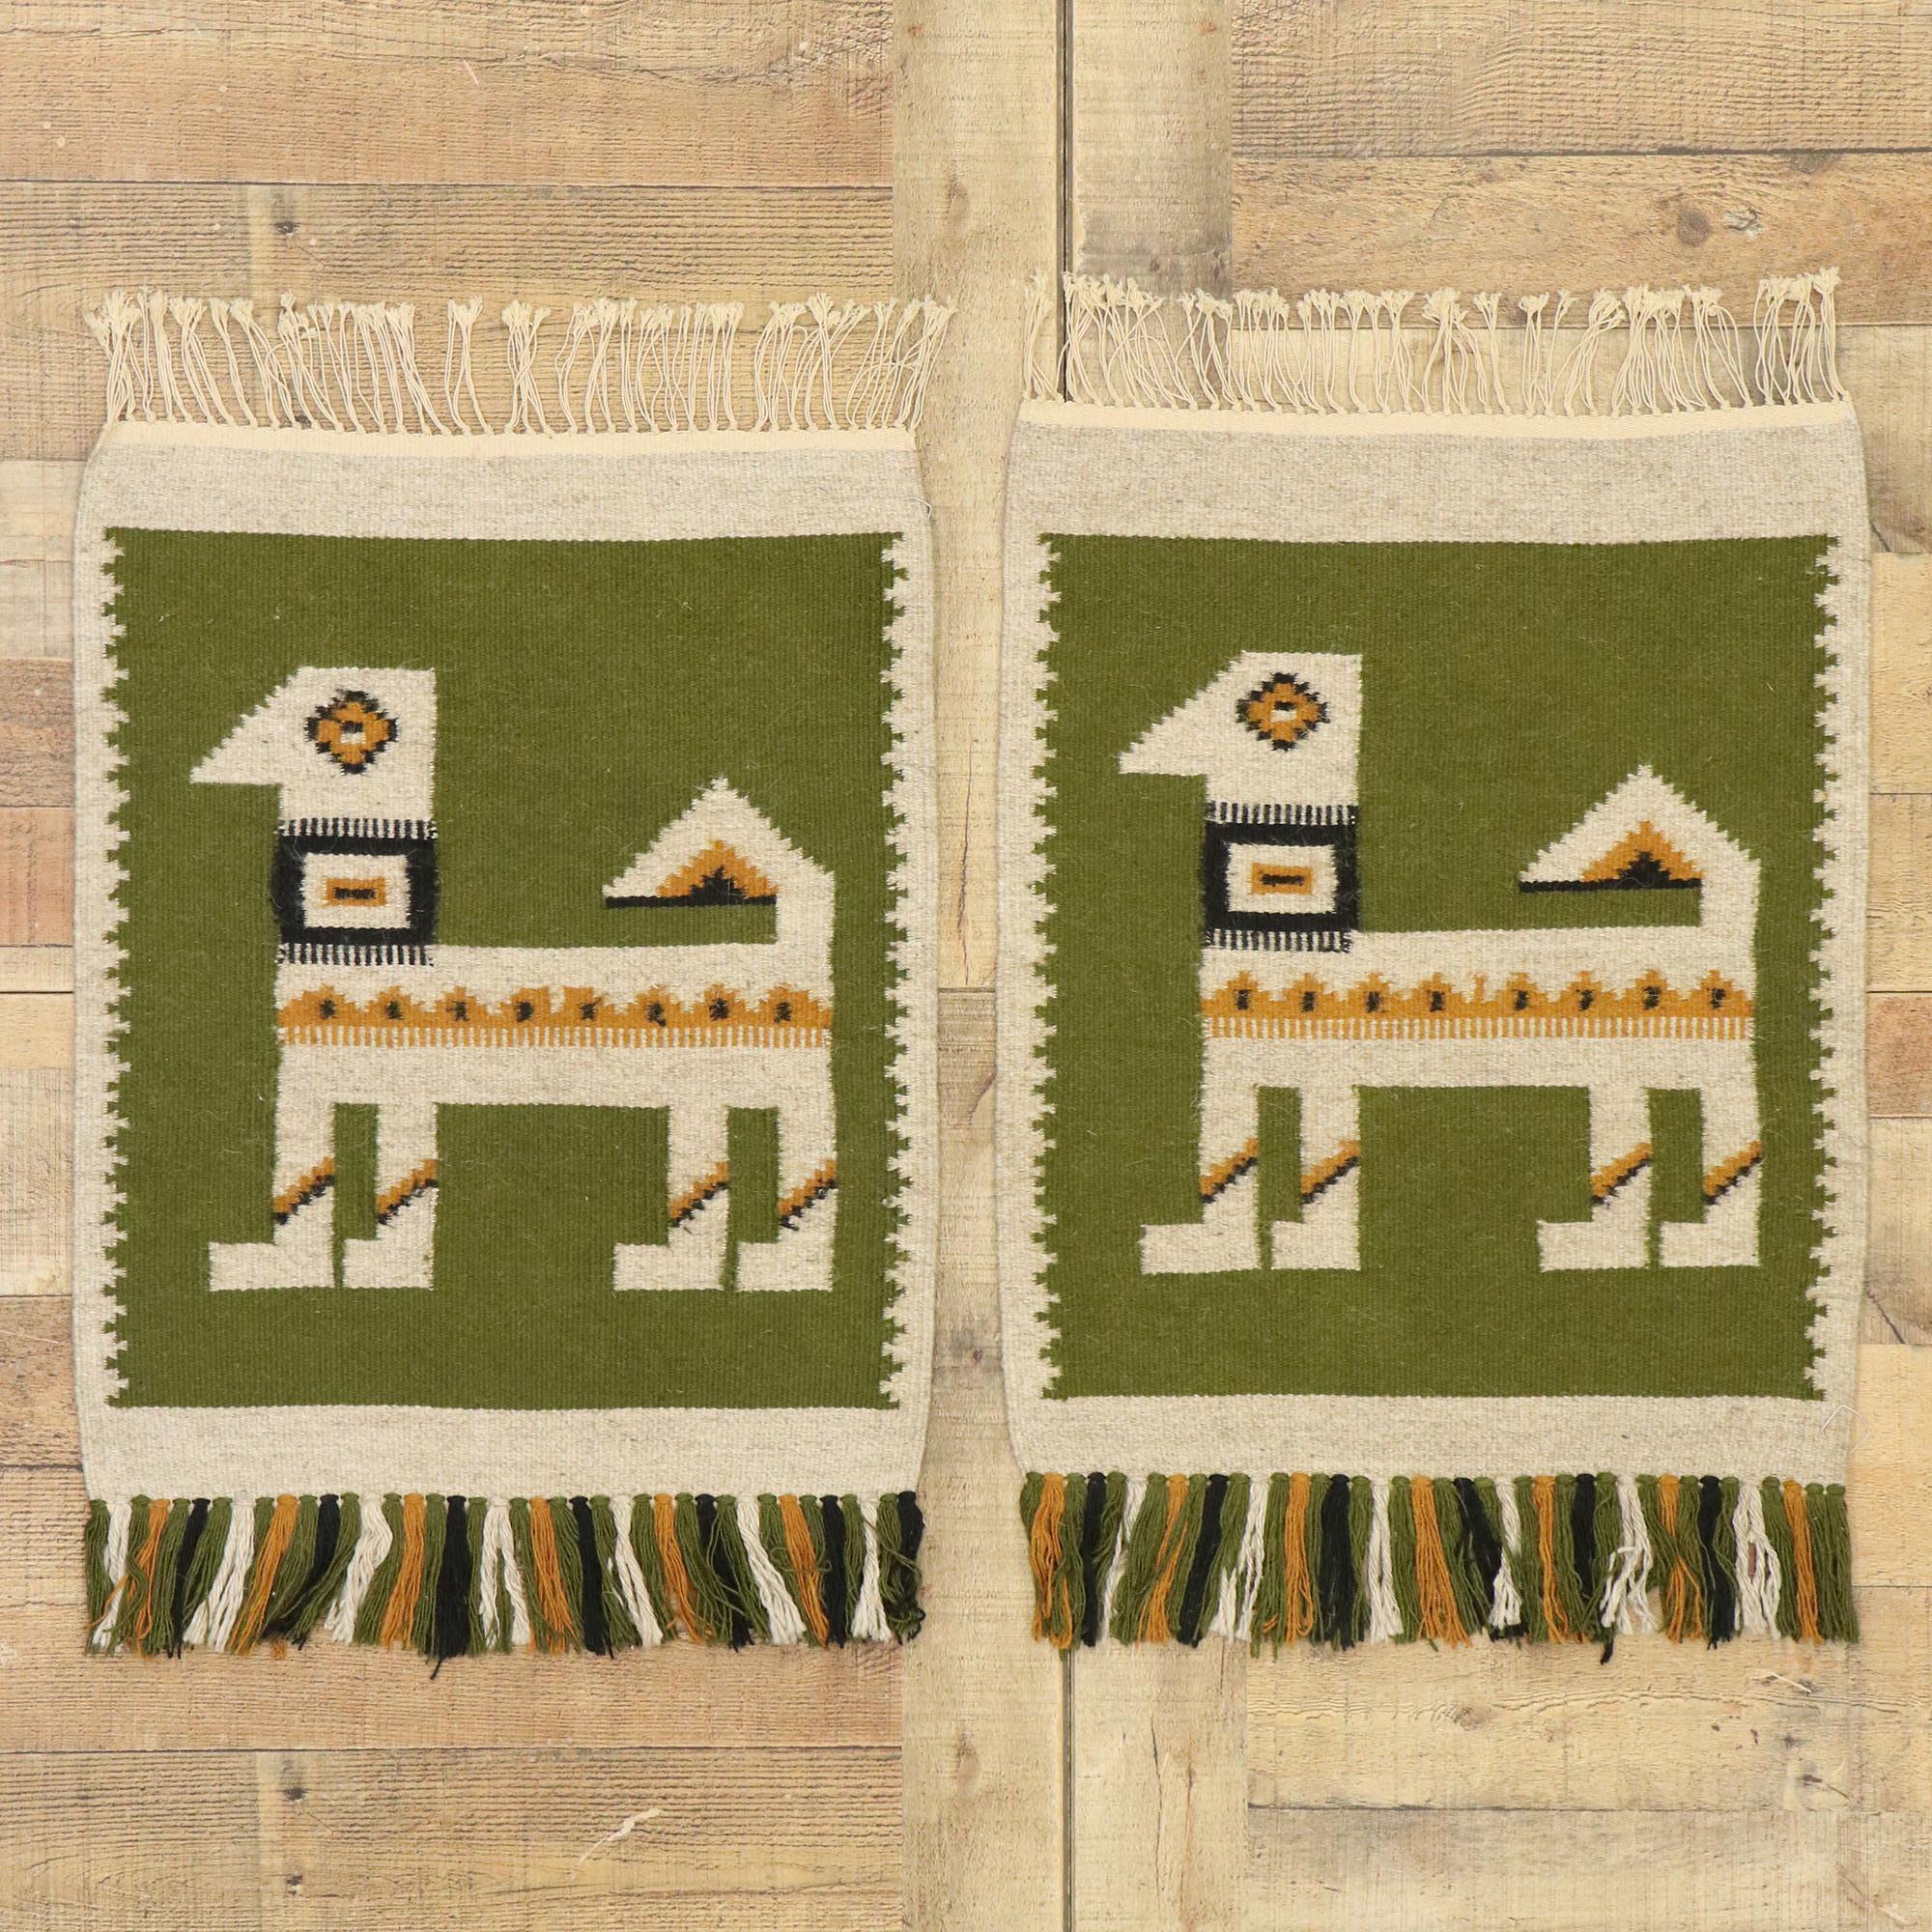 Matching Pair of Vintage Russian Kilim Rugs with Folk Art Style 3